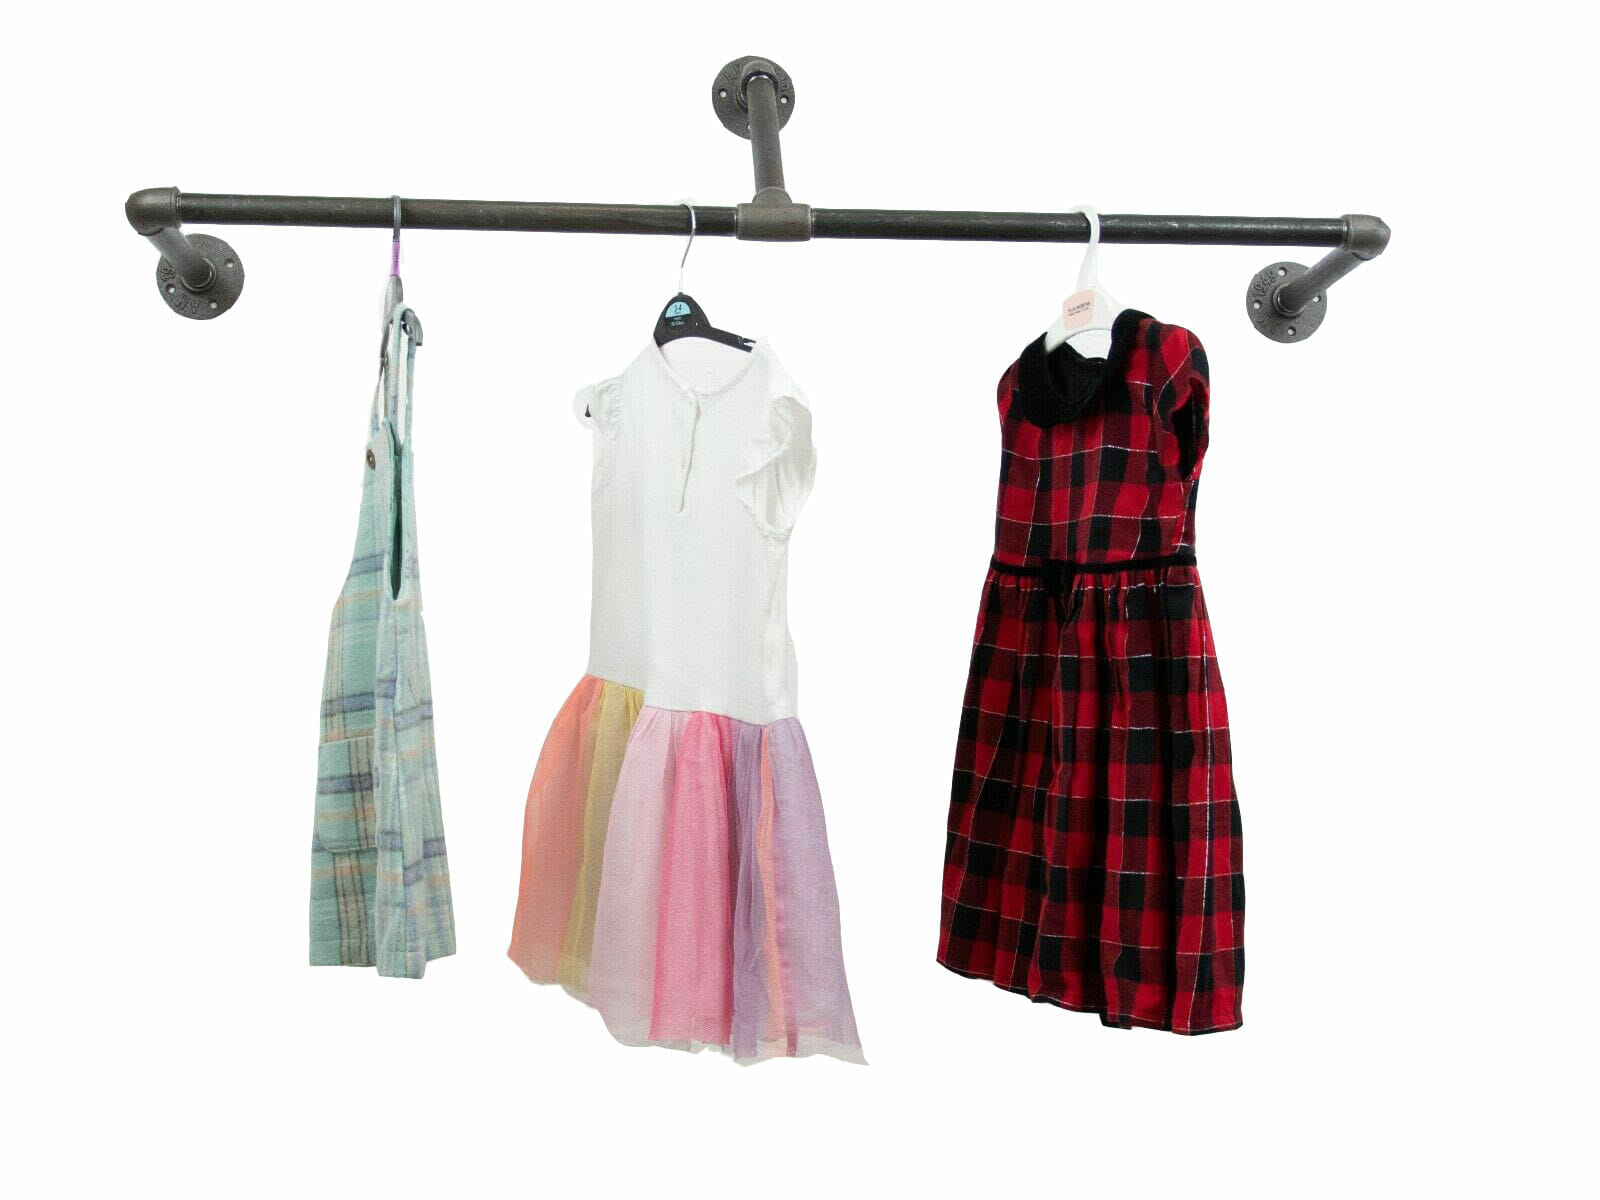 Raised-Middle-Bracket-Pipe-Clothes-Rail-Hanging-Clothing